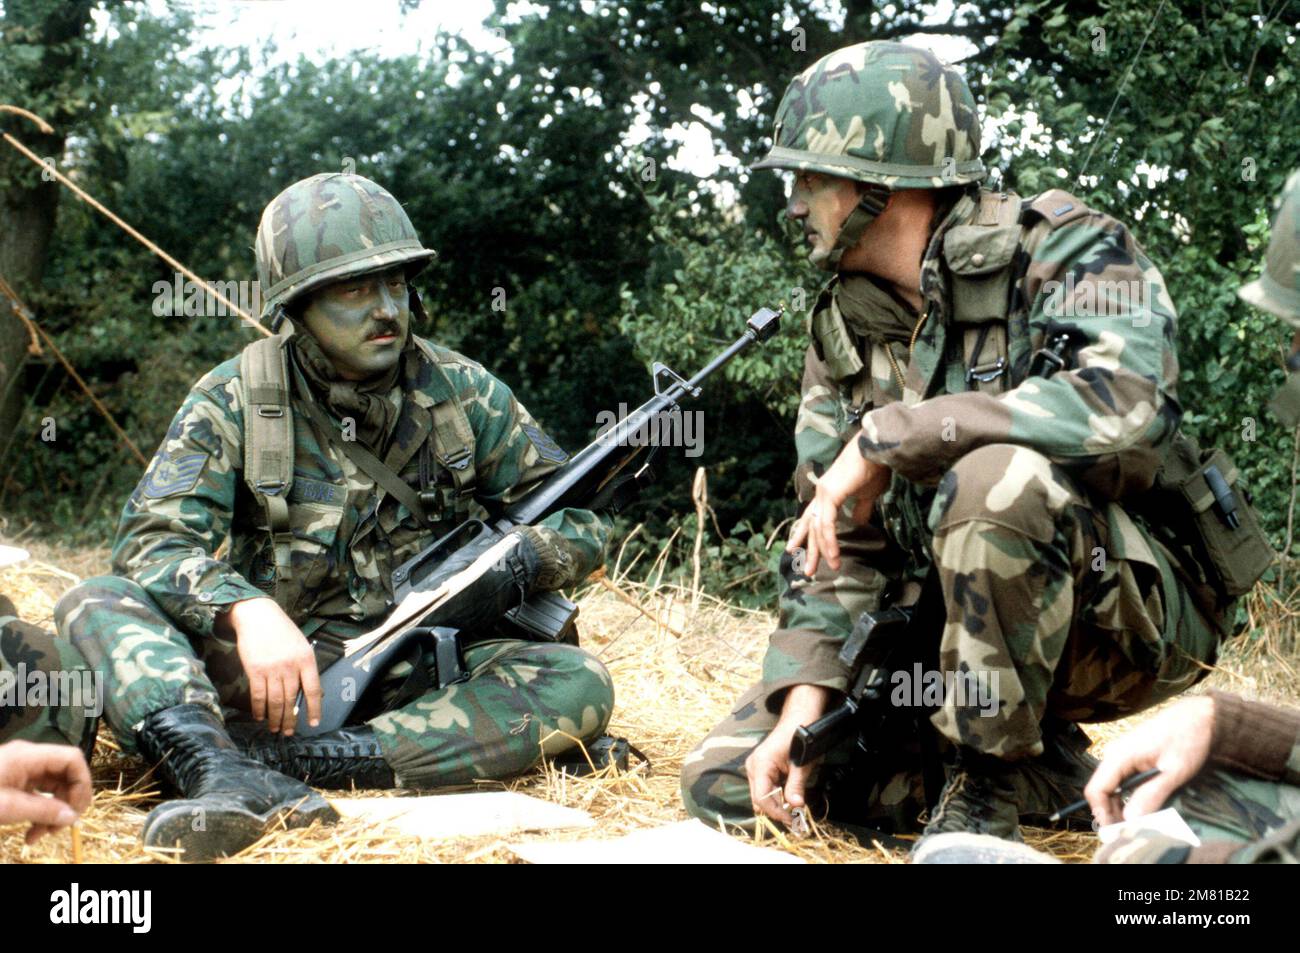 Air Force security personnel, armed with M16A1 rifles and wearing camouflage paint, participate in Operation URGENT FURY. Subject Operation/Series: URGENT FURY Country: Grenada (GRD) Stock Photo